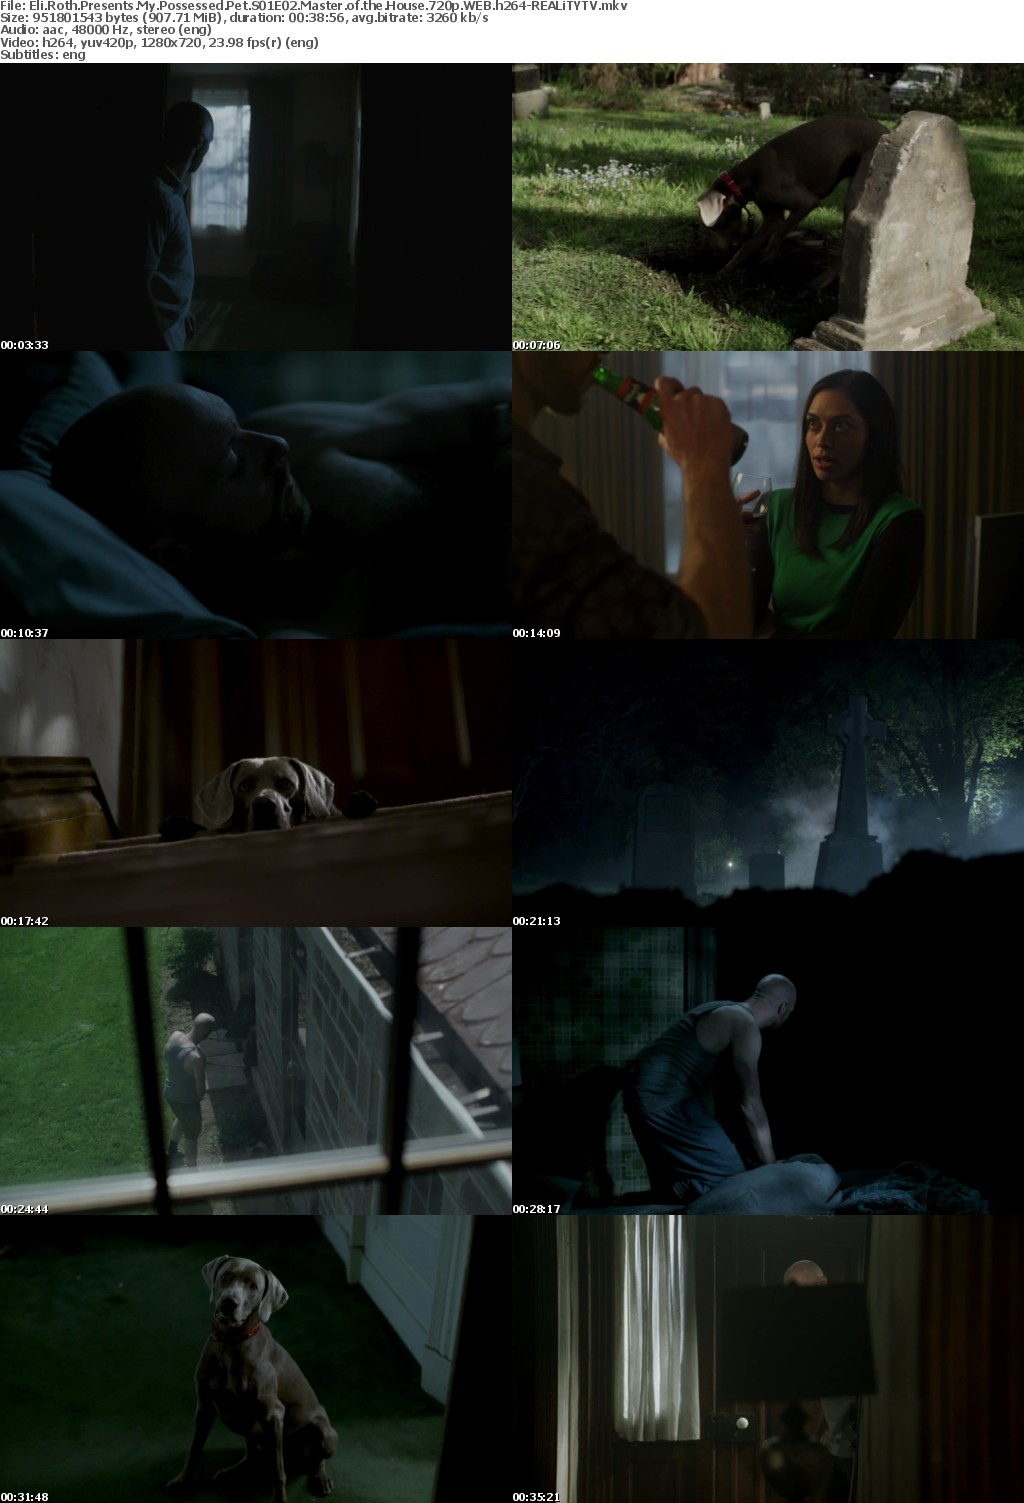 Eli Roth Presents My Possessed Pet S01E02 Master of the House 720p WEB h264-REALiTYTV